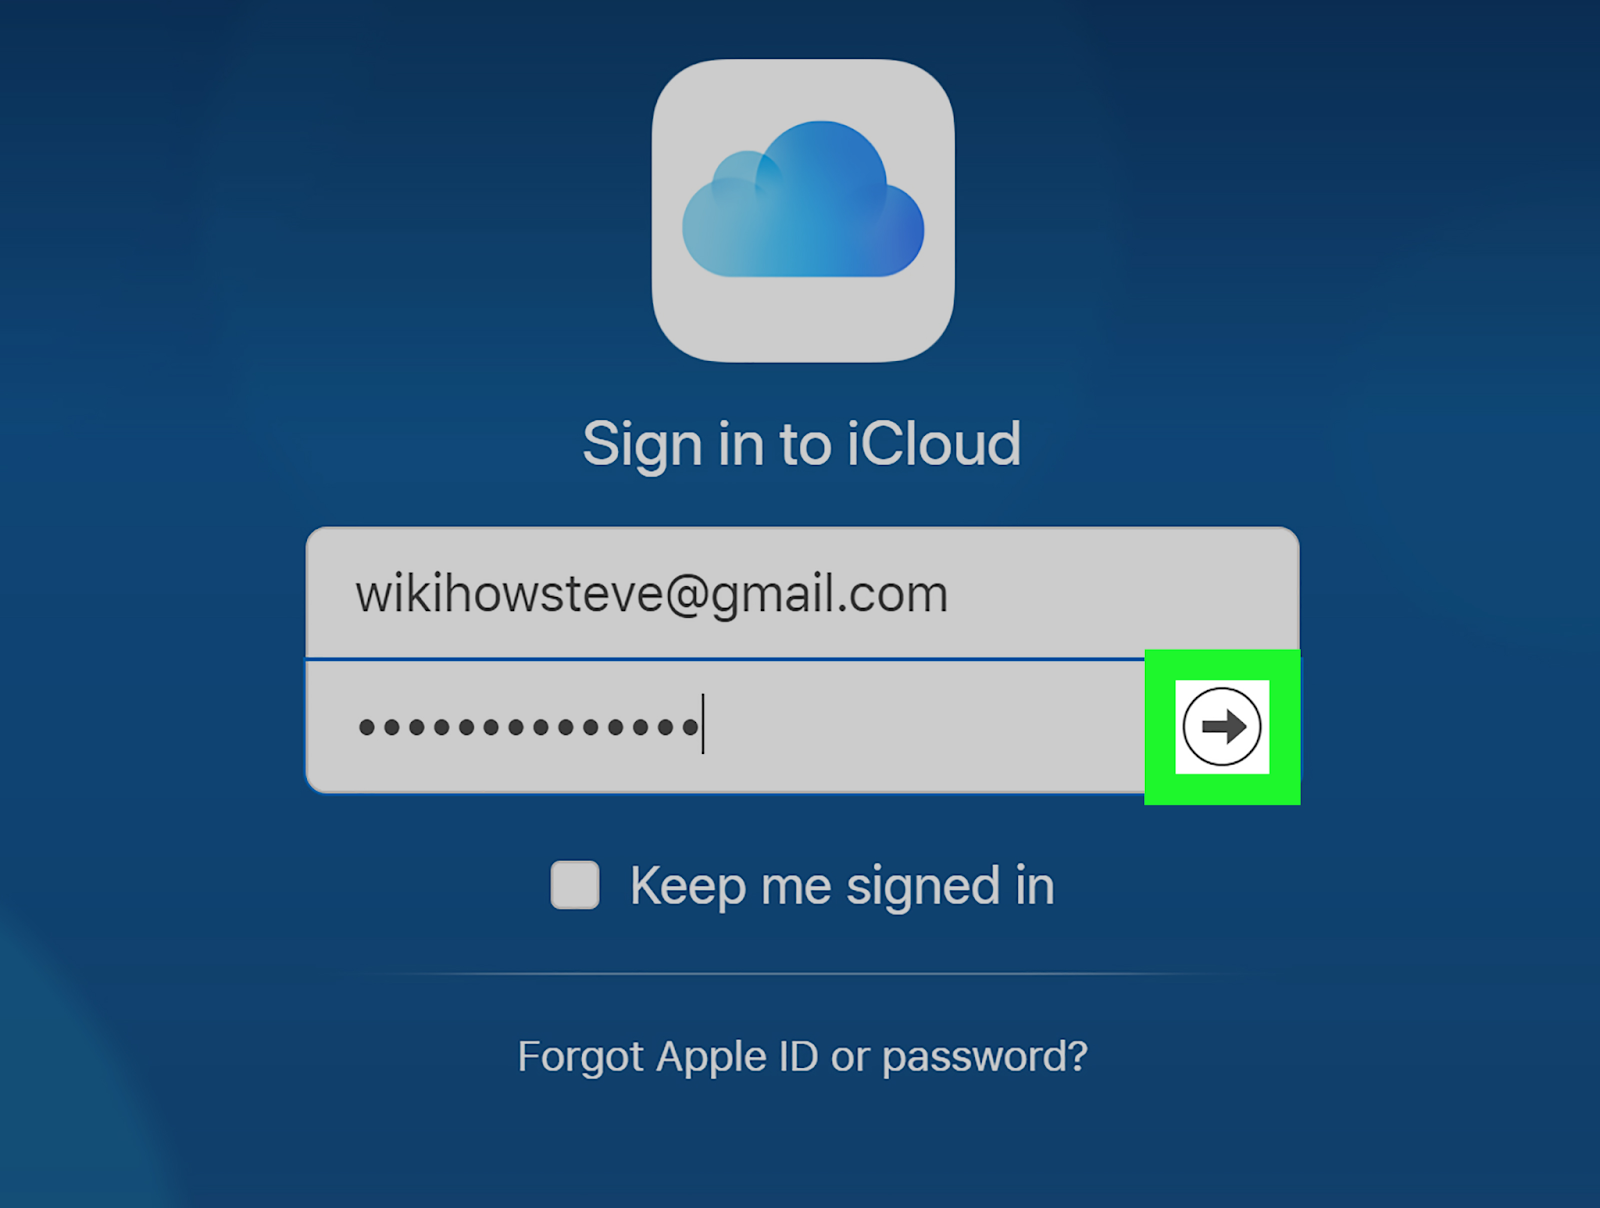 Re-sign into iCloud Account